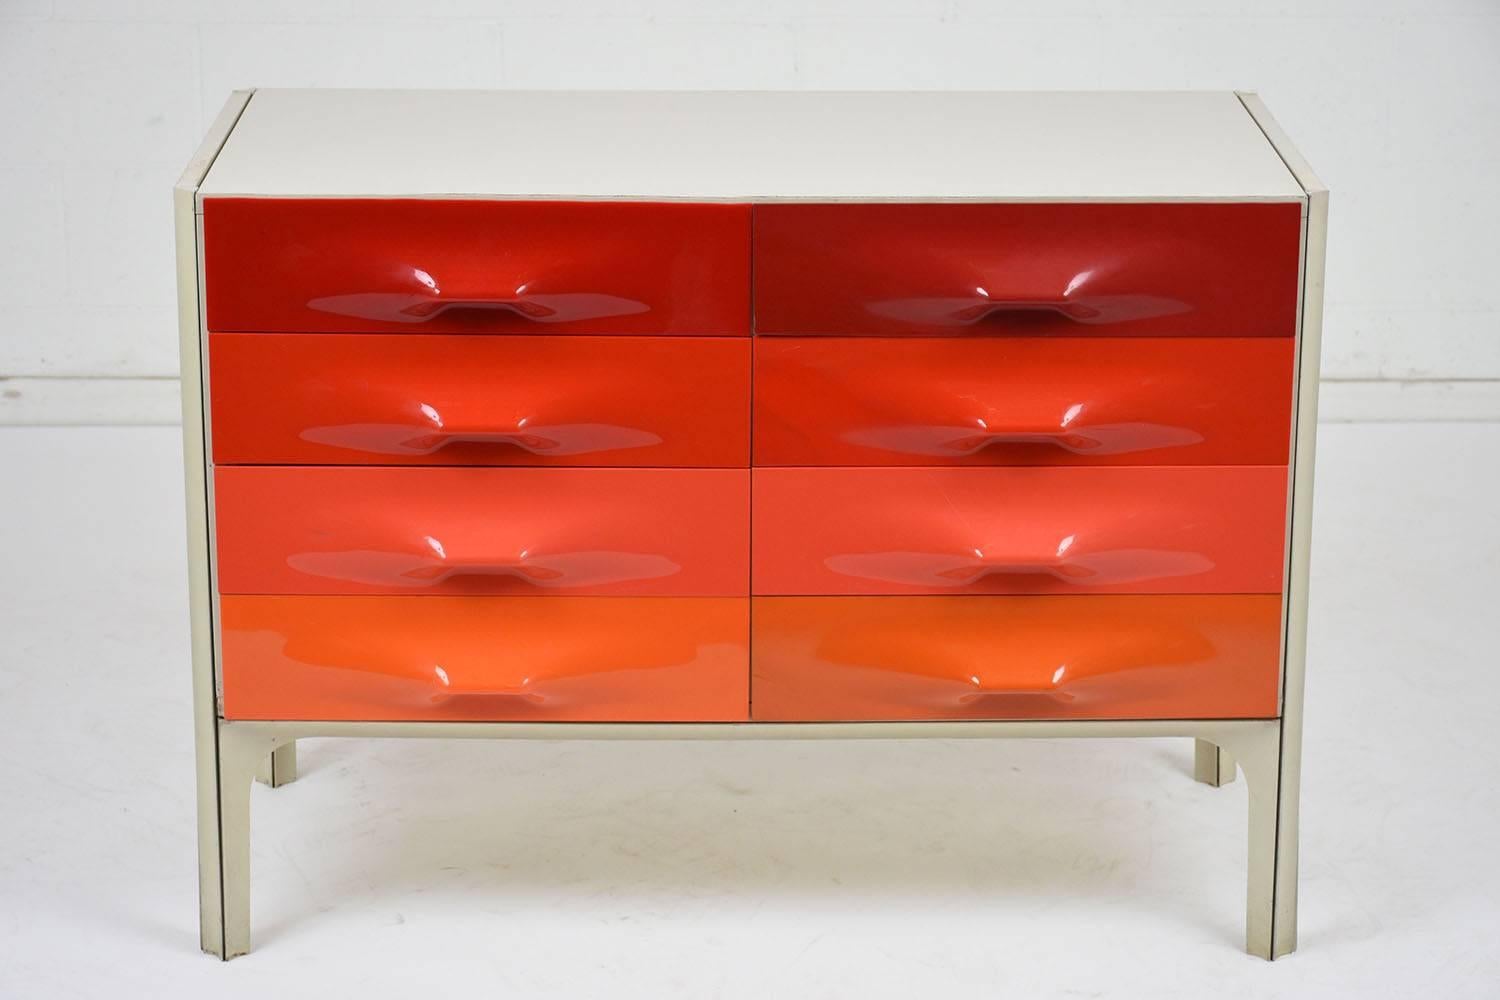 This 1960s Mid-Century Modern DF-2000 chest of drawers is designed by Raymond Loewy for Doubinsky-Freres. There are six drawers finished in varying tones of red and orange with plastic fronts and handles. The white laminate covered chest shows signs